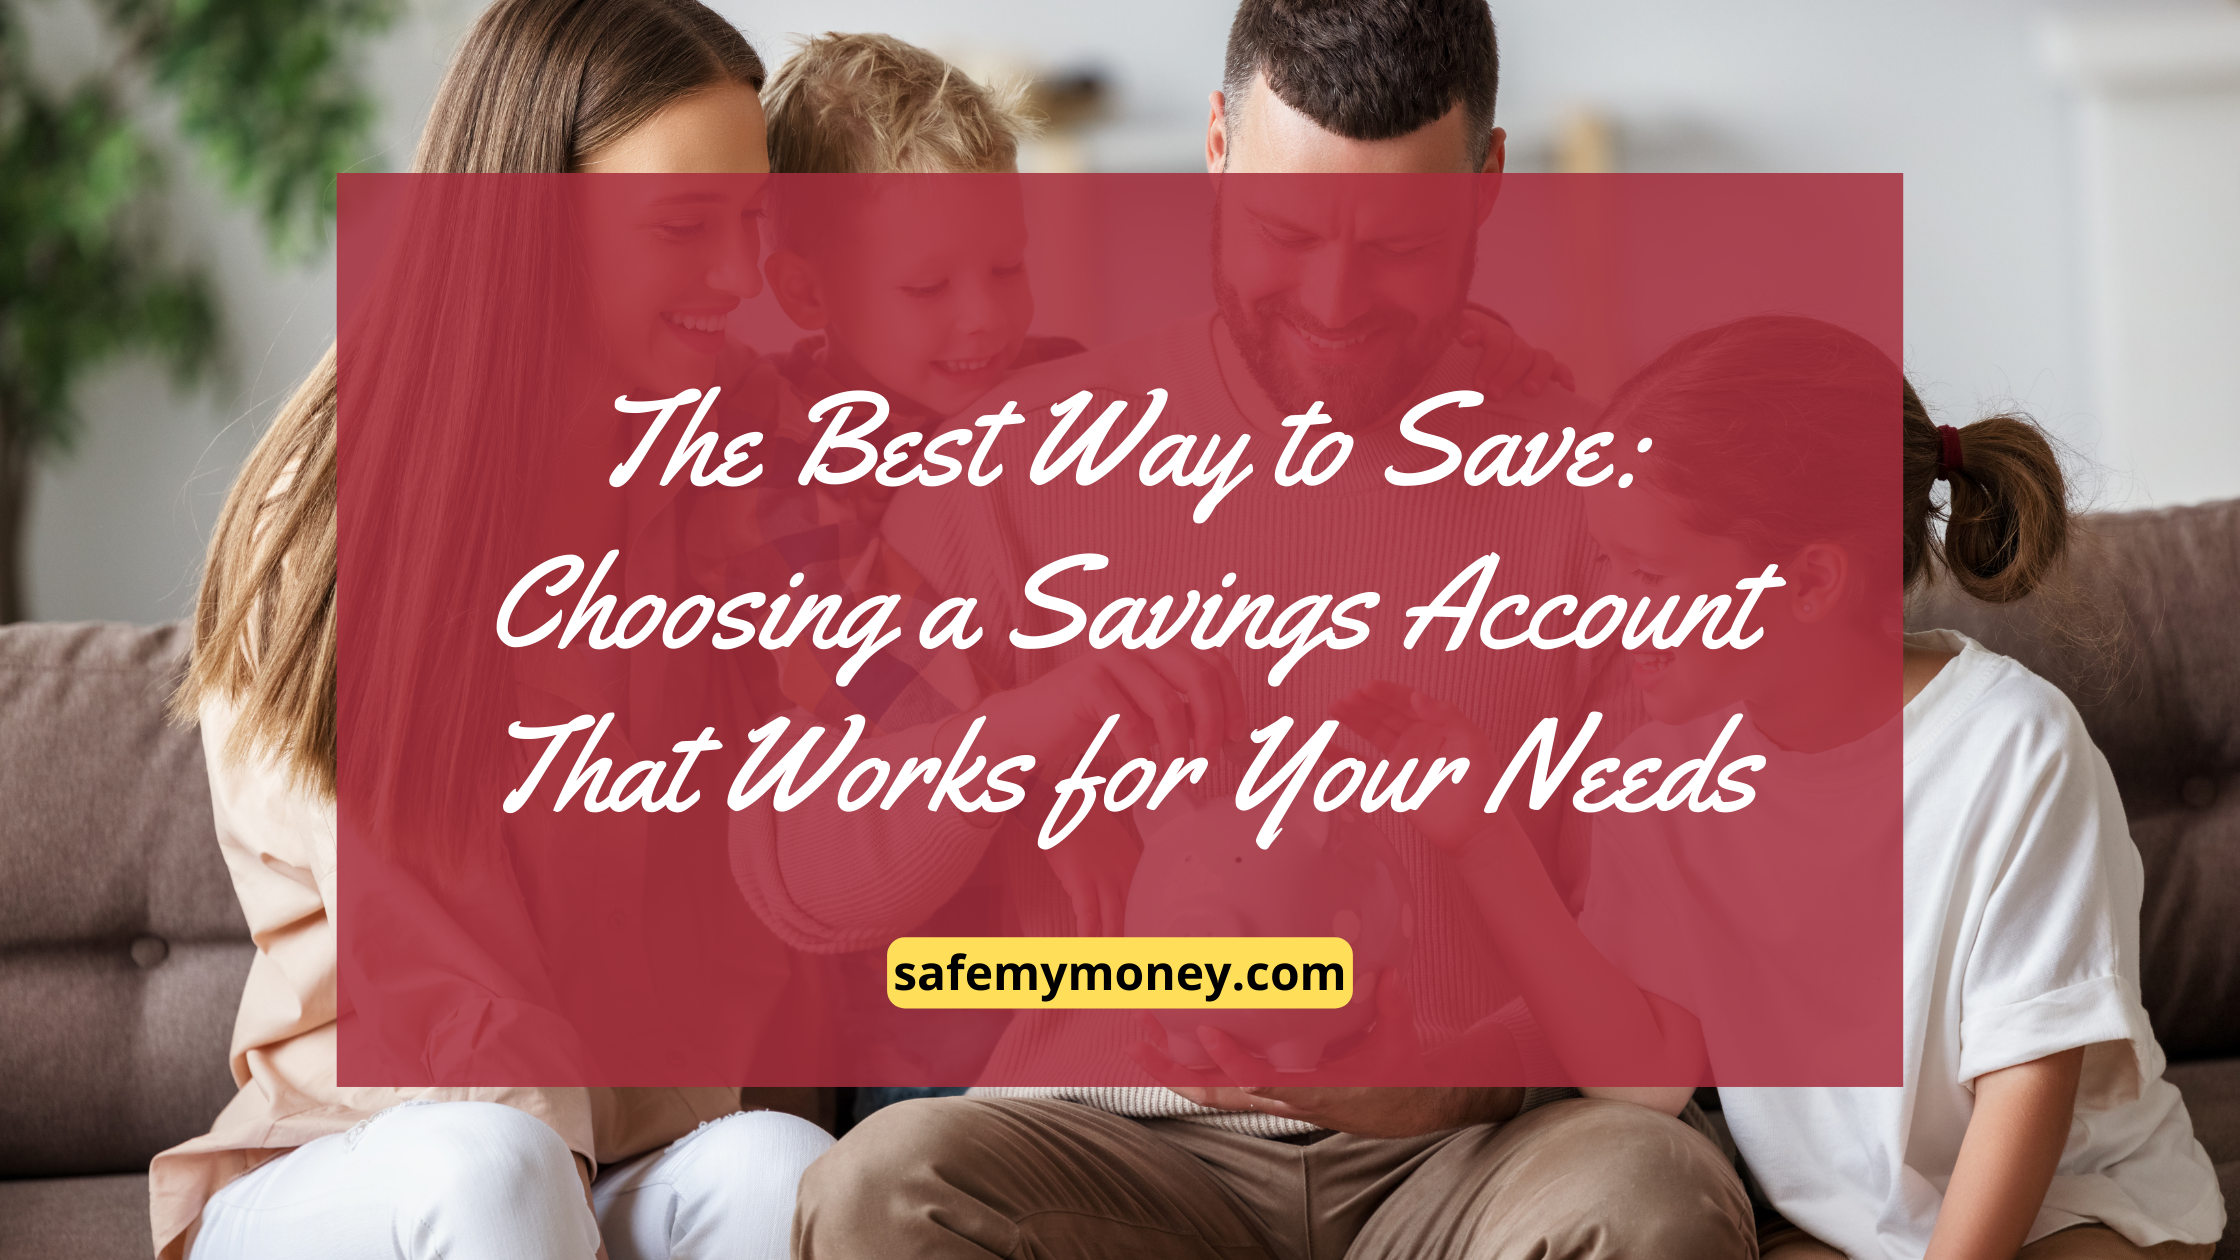 The Best Way to Save: Choosing a Savings Account That Works for Your Needs